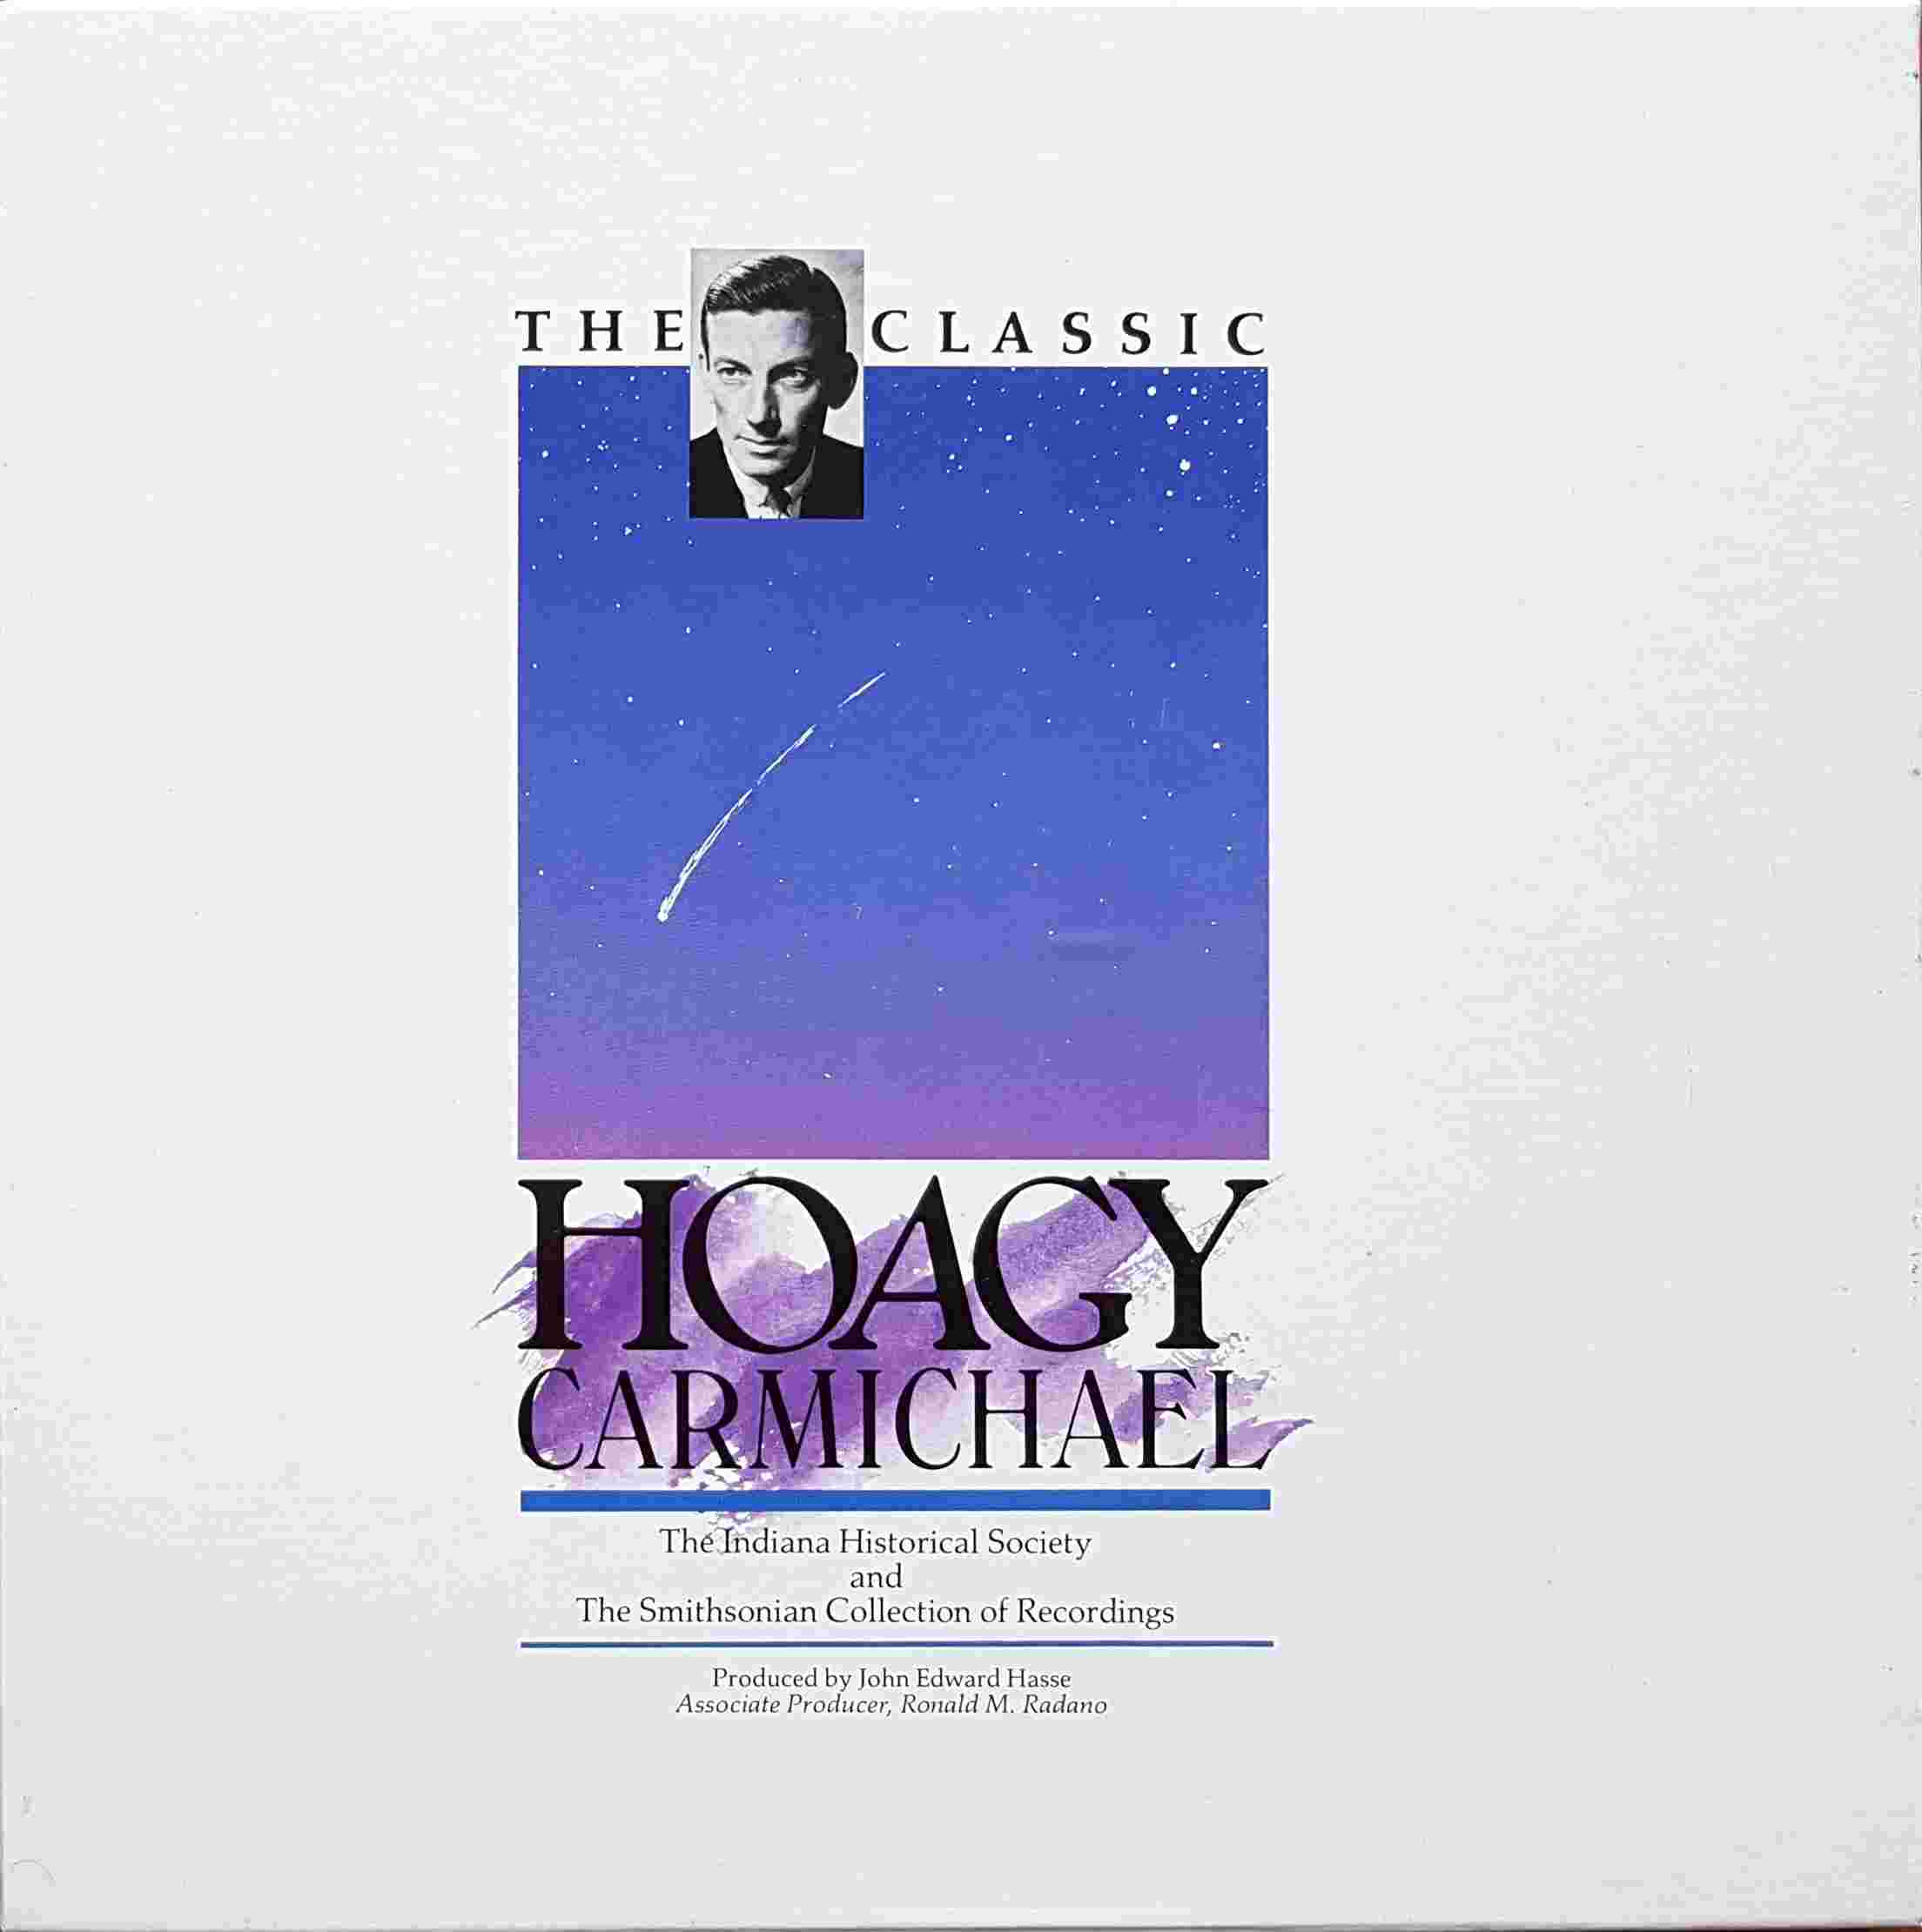 Picture of Hoagy Carmichael by artist Hoagy Carmichael from the BBC albums - Records and Tapes library